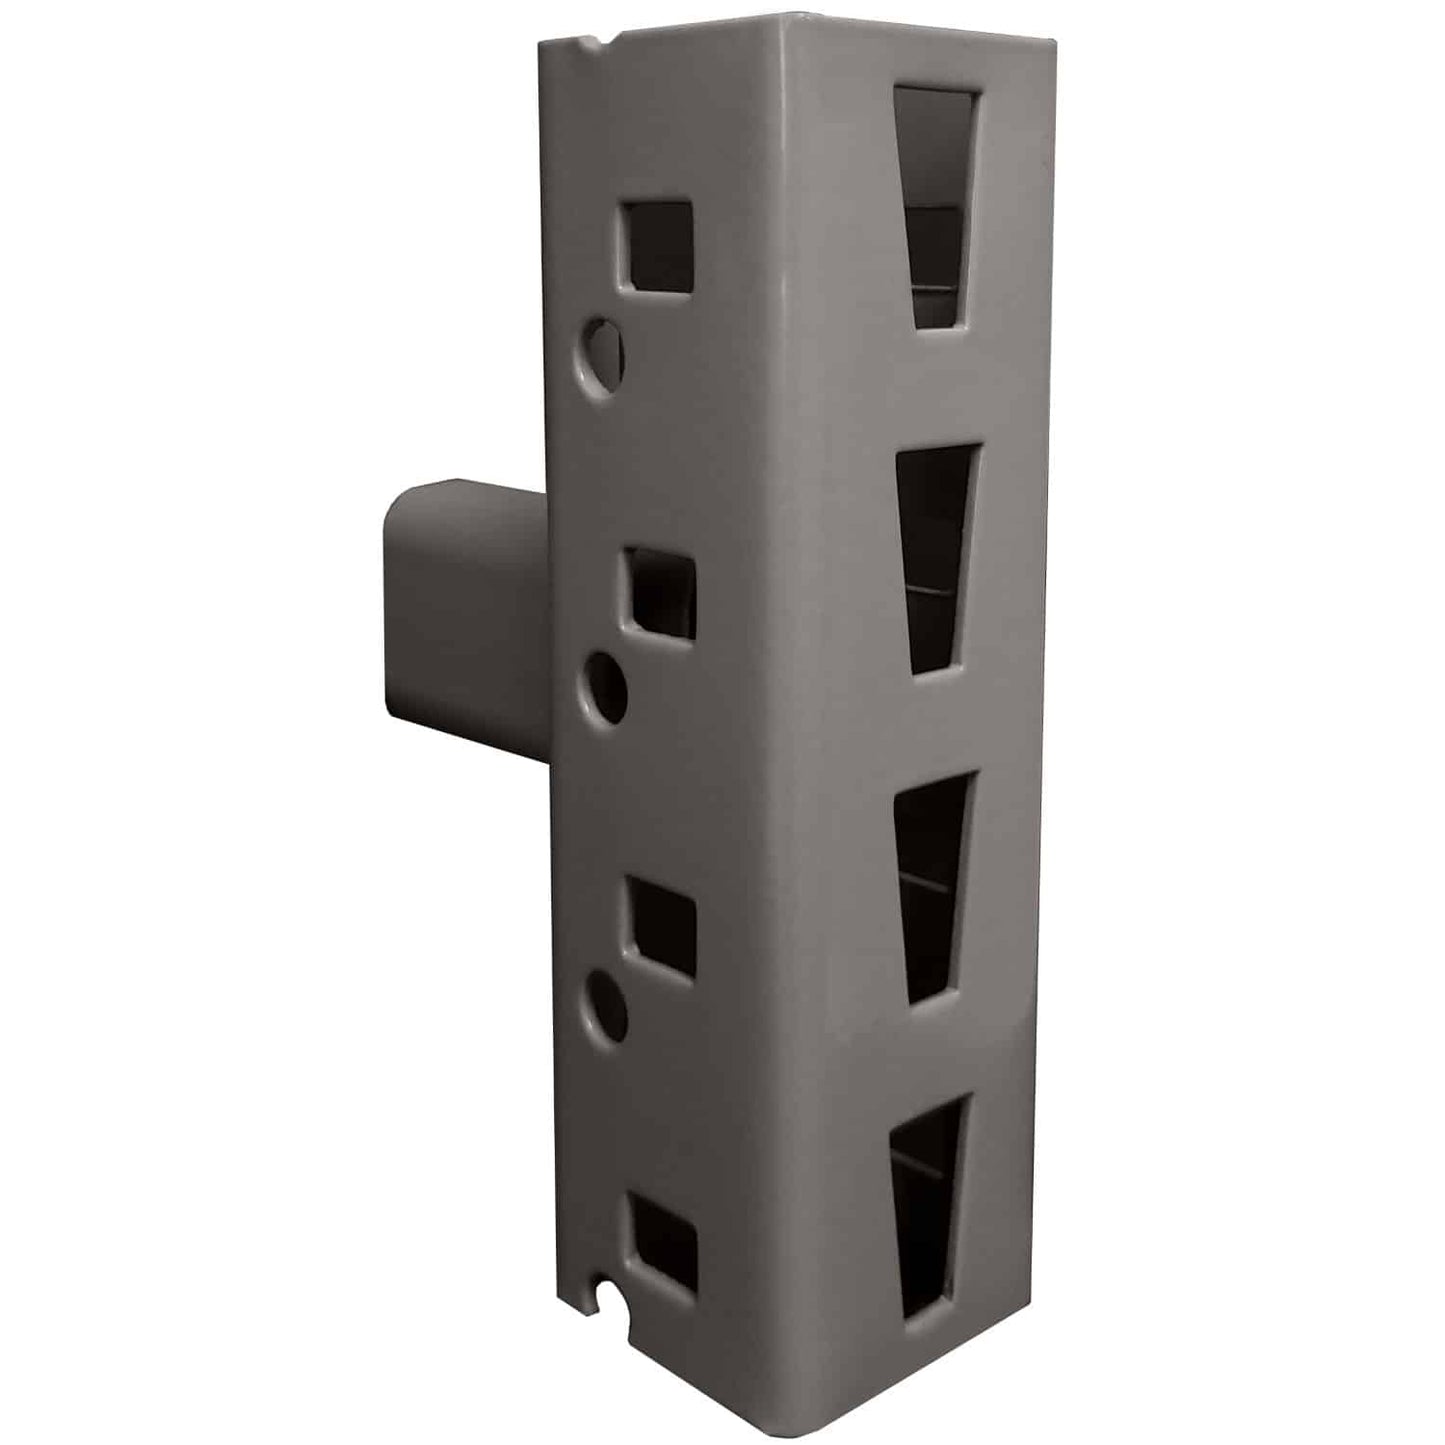 Bulk Storage Rack with Front-to-Back Supports - Lyon